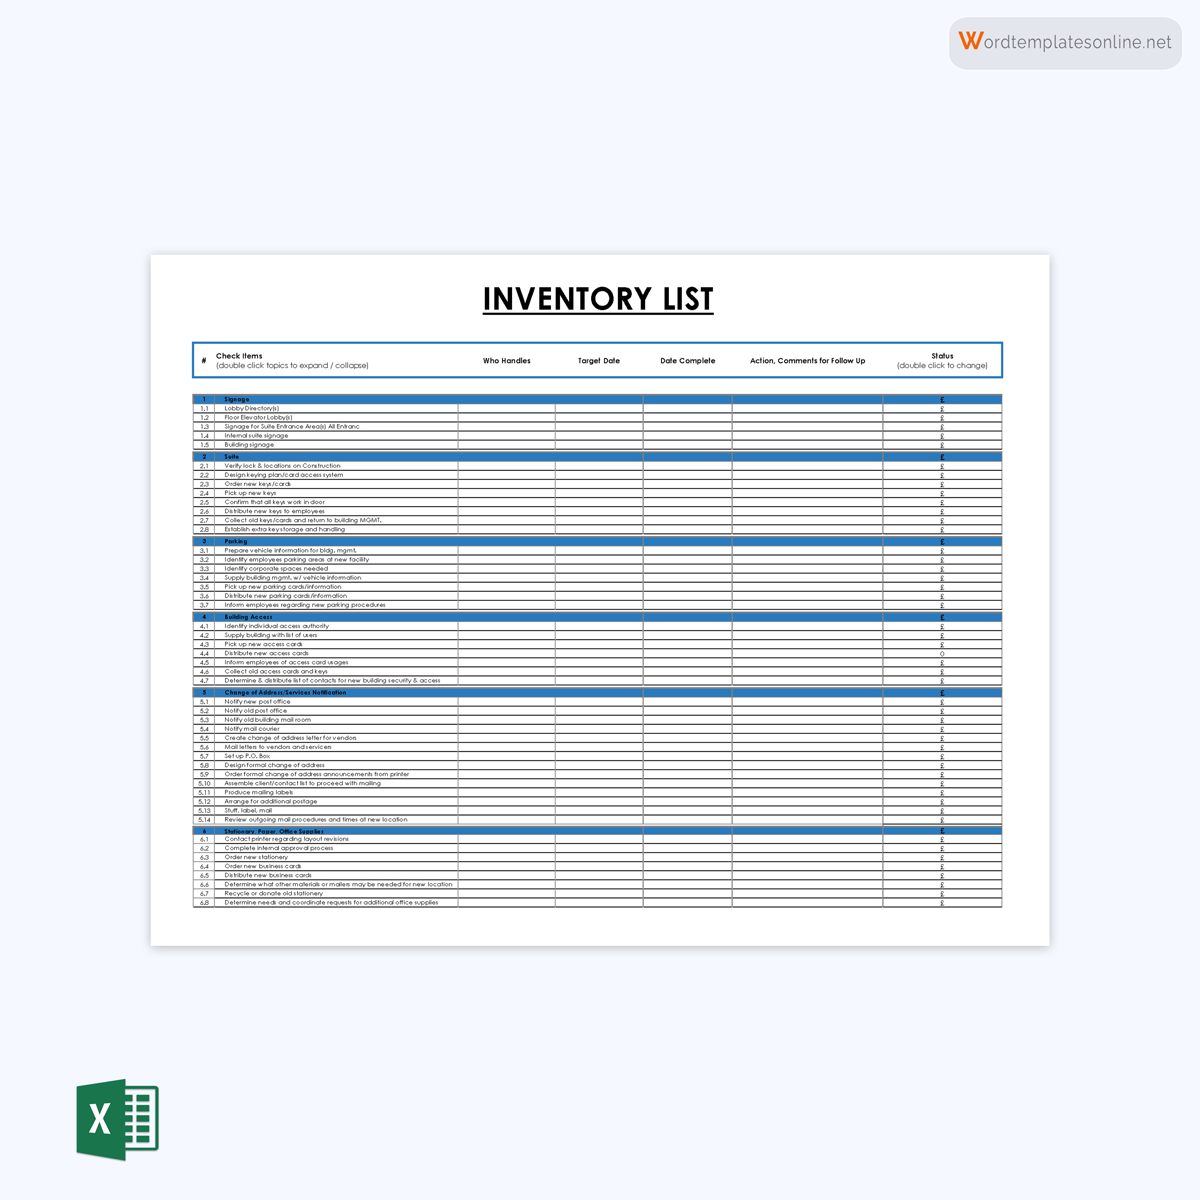 Inventory checklist spreadsheet template - free download